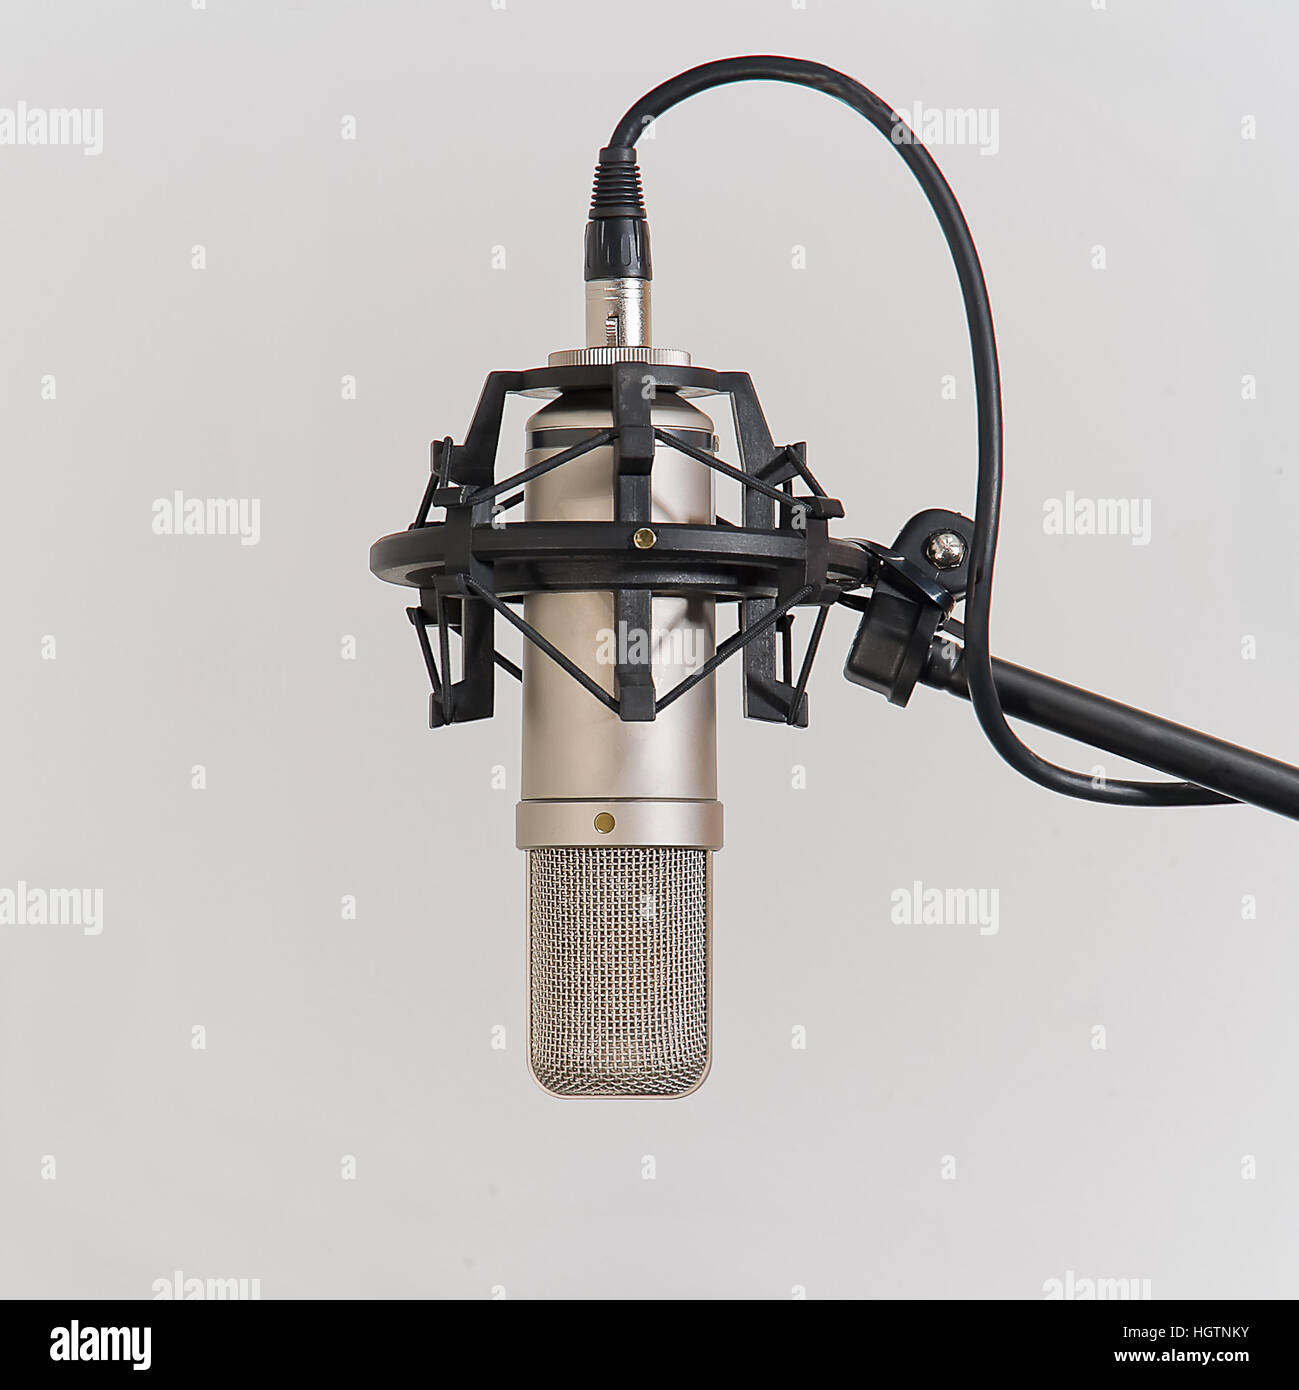 Professional condenser microphone in a studio environment Stock Photo